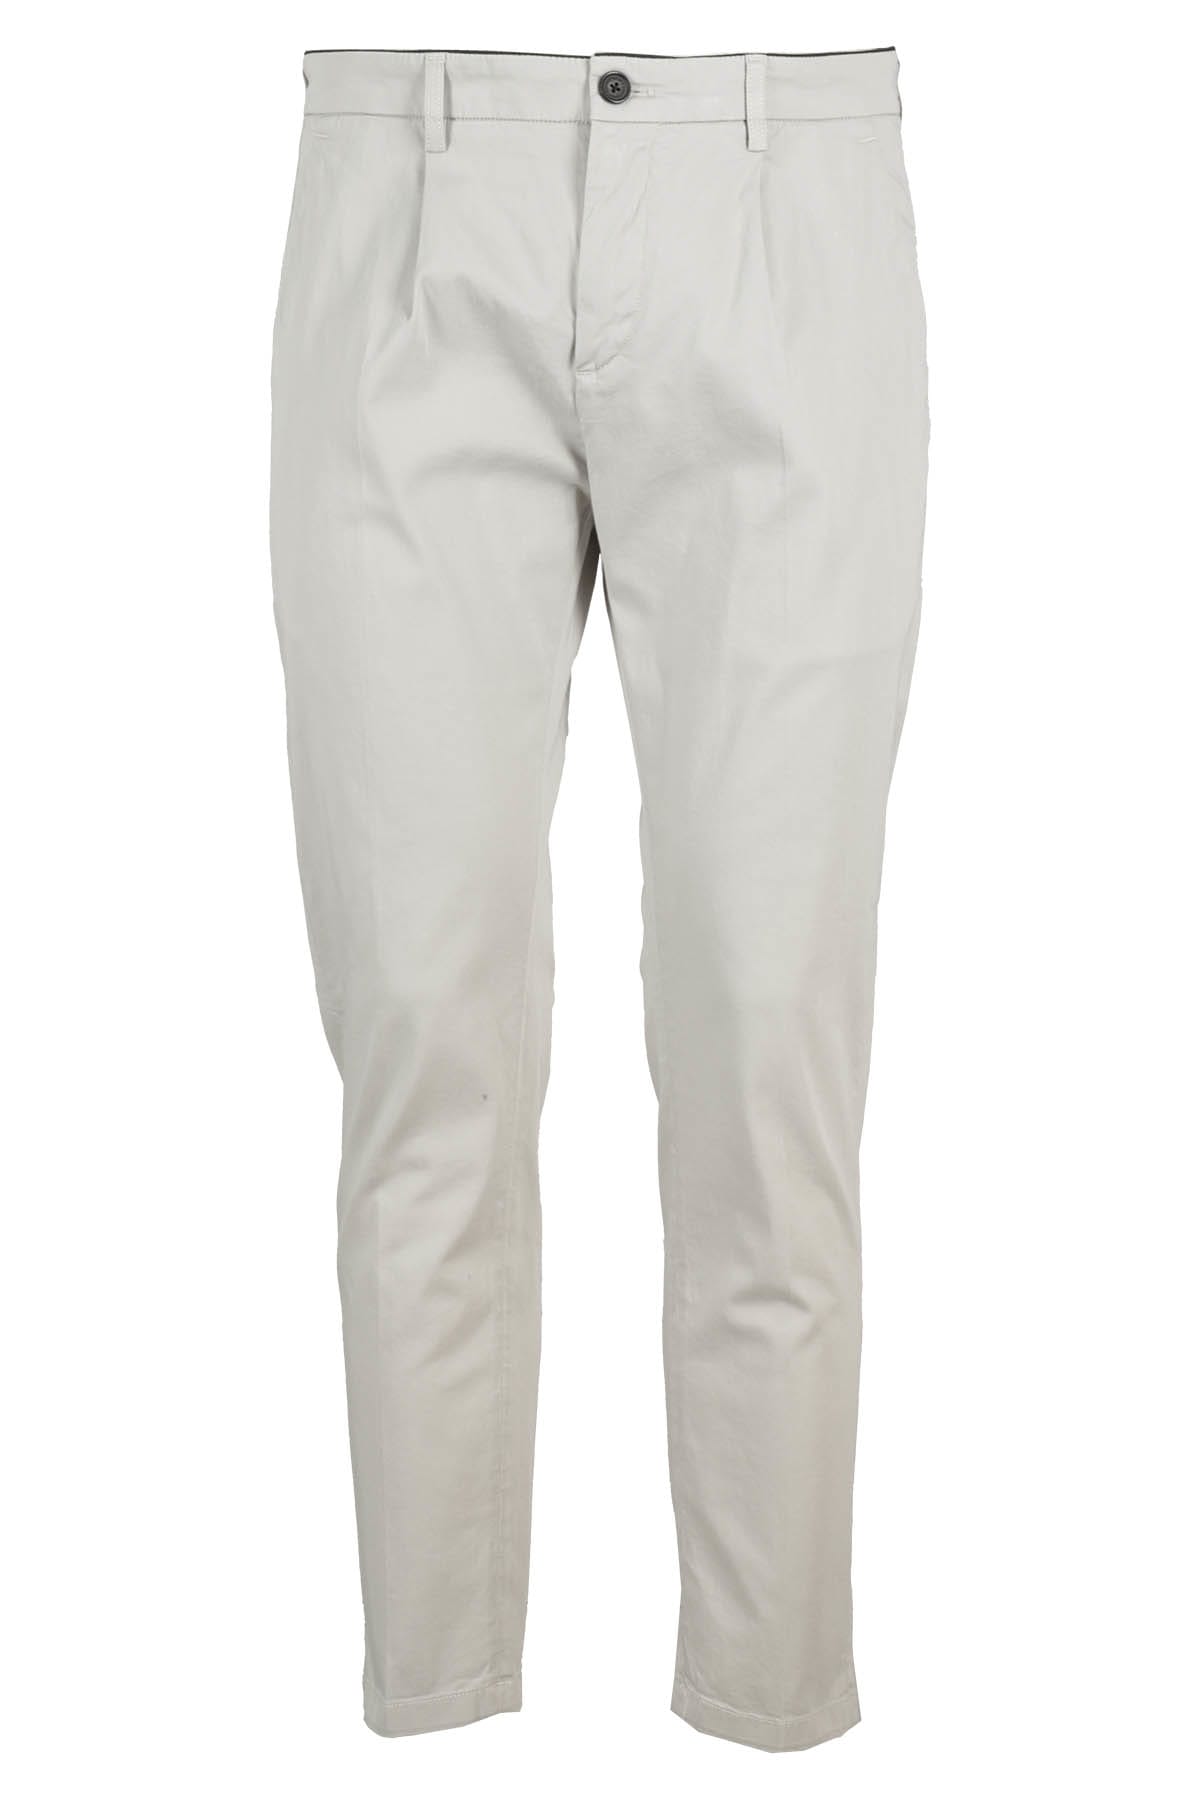 Department Five Prince Pences Chinos In Stucco